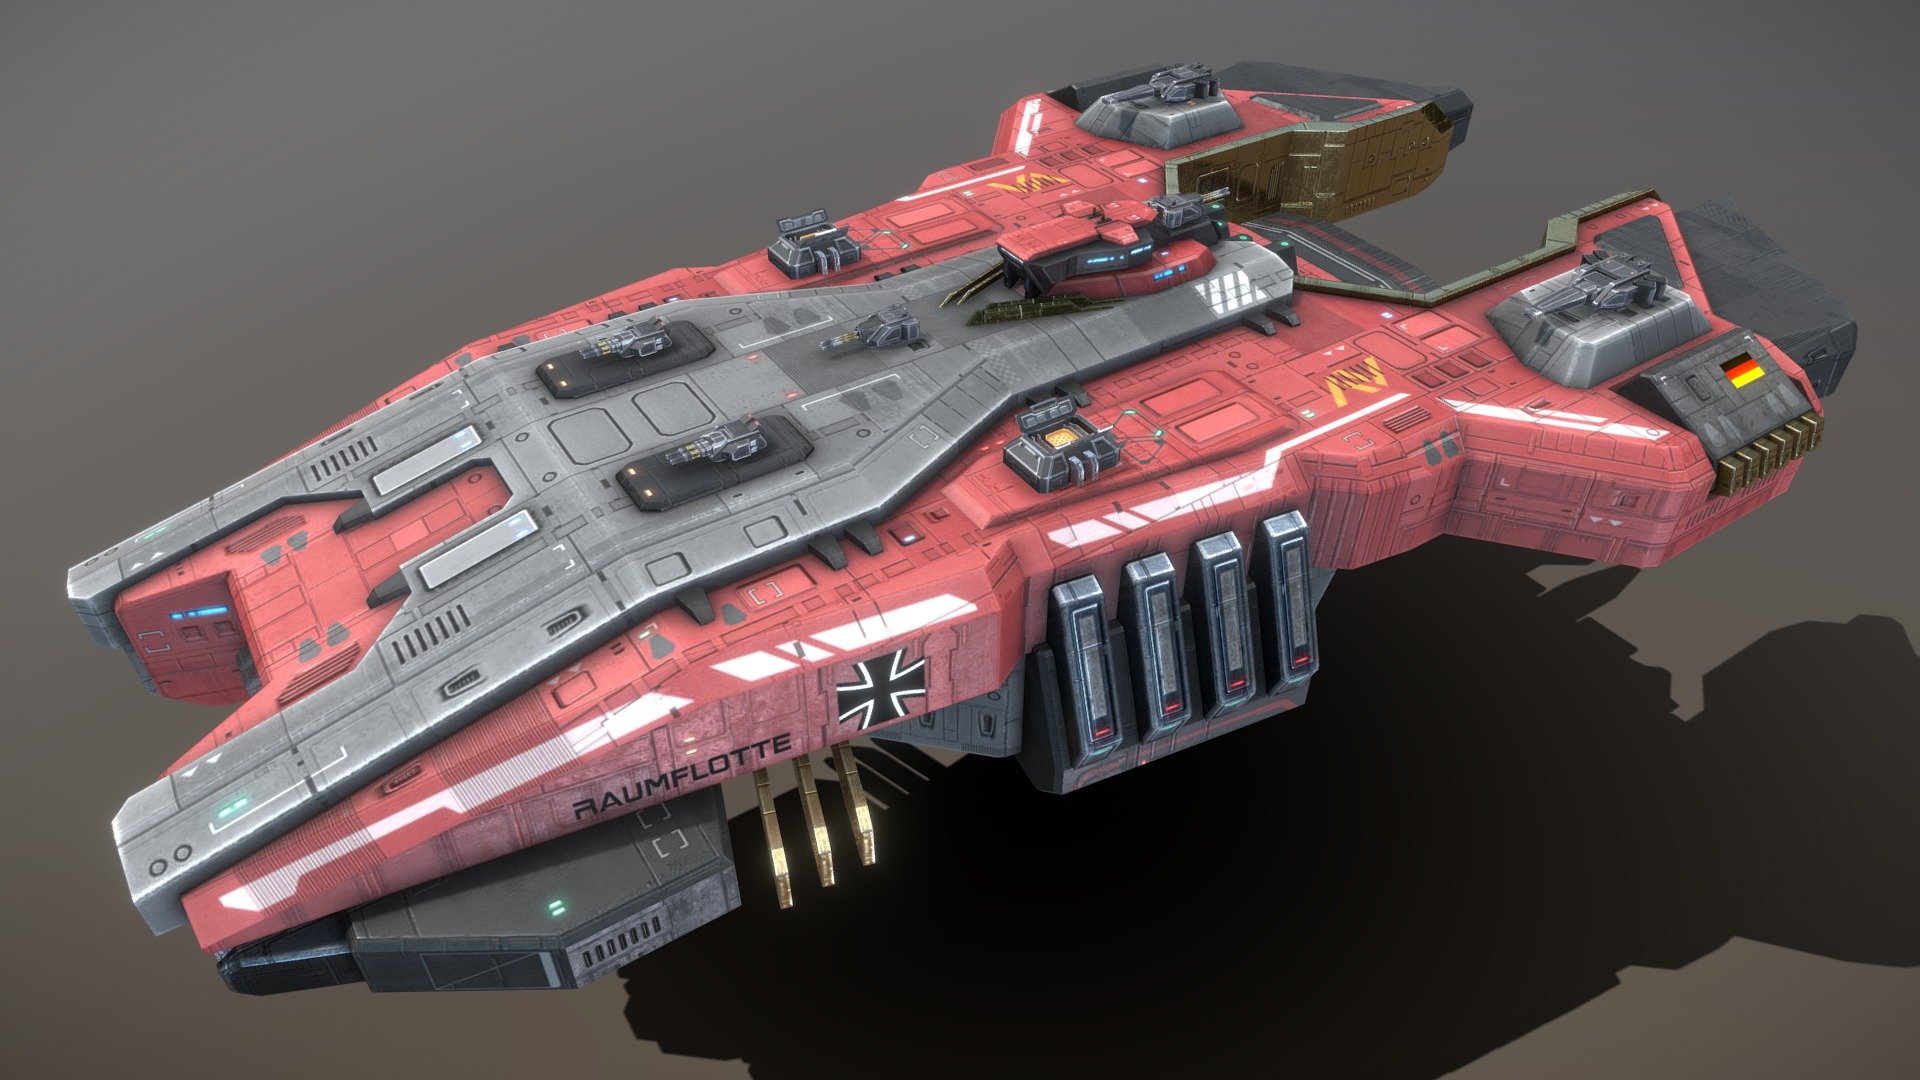 This is a model of a low-poly and game-ready scifi spaceship. 

The weapons are separate meshes and can be animated with a keyframe animation tool. The weapon loadout can be changed too. 

This model has optional maneuvering thrusters for newtonian physics based movement. They do fit on other ships too.

The model comes with several differently colored texture sets. The PSD file with intact layers is included.

Please note: The textures in the Sketchfab viewer have a reduced resolution (2K instead of 4K) to improve Sketchfab loading speed.

**If you have purchased this model please make sure to download the “additional file”.  It contains FBX and OBJ meshes, full resolution textures and the source PSDs with intact layers. The meshes are separate and can be animated (e.g. firing animations for gun barrels, rotating turrets 3d model